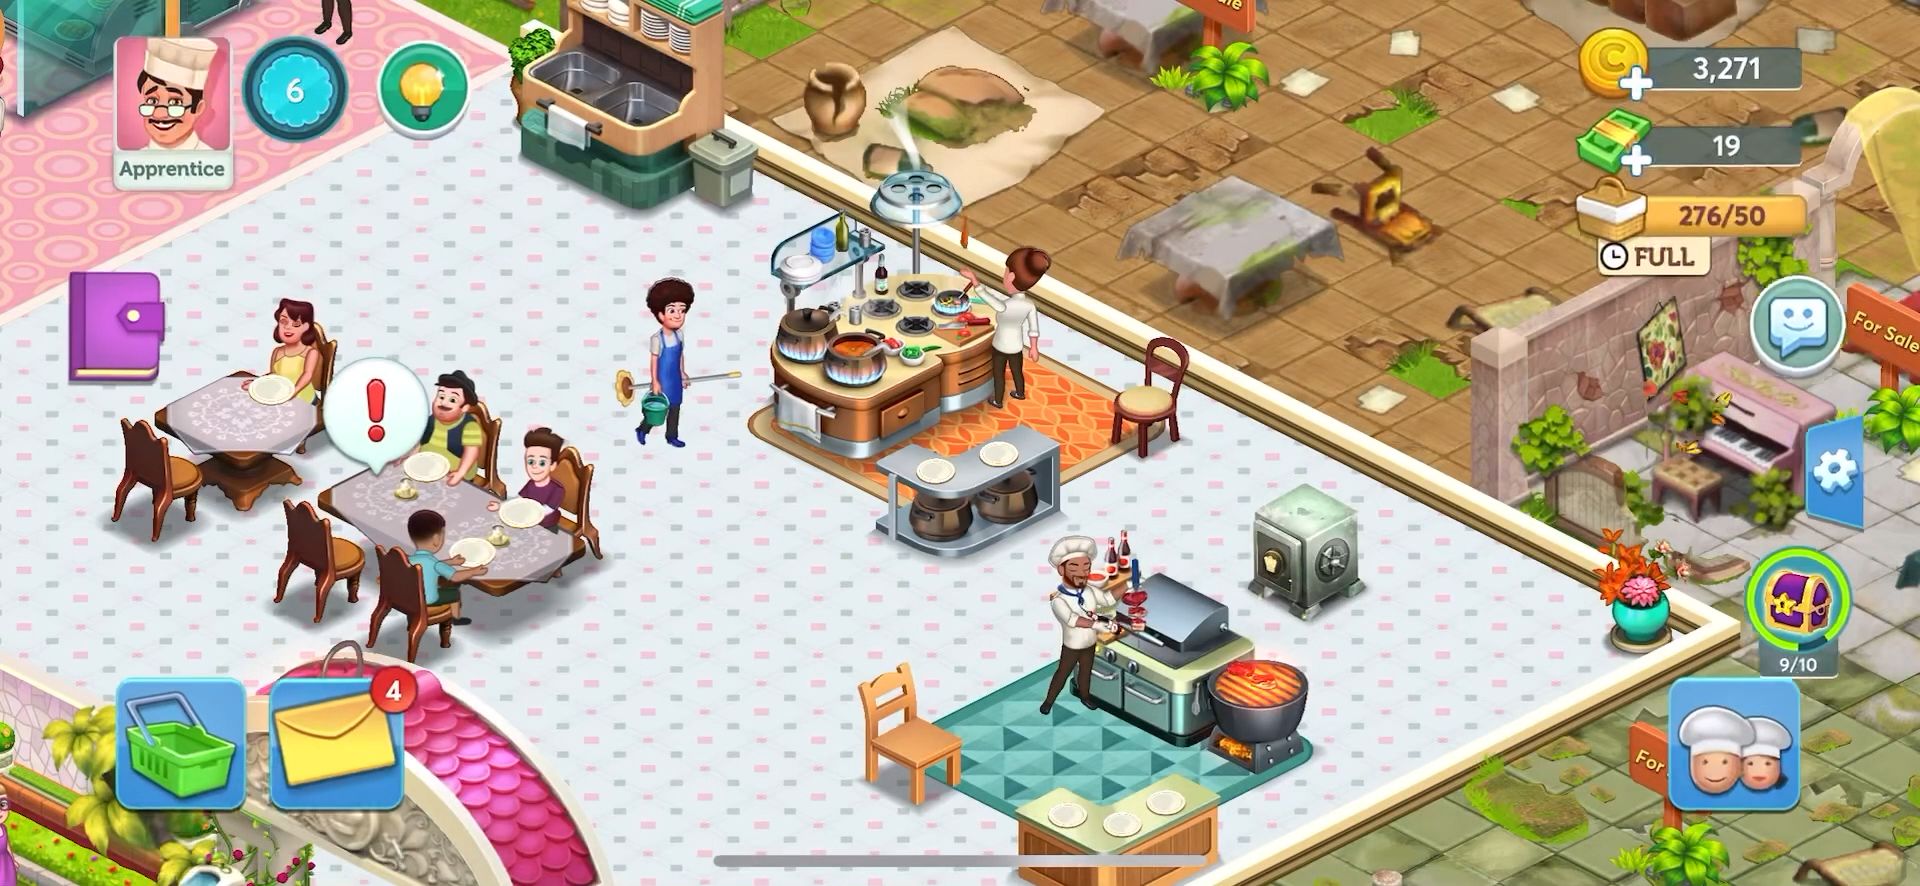 Tasty Cooking Cafe & Restaurant Game: Star Chef 2